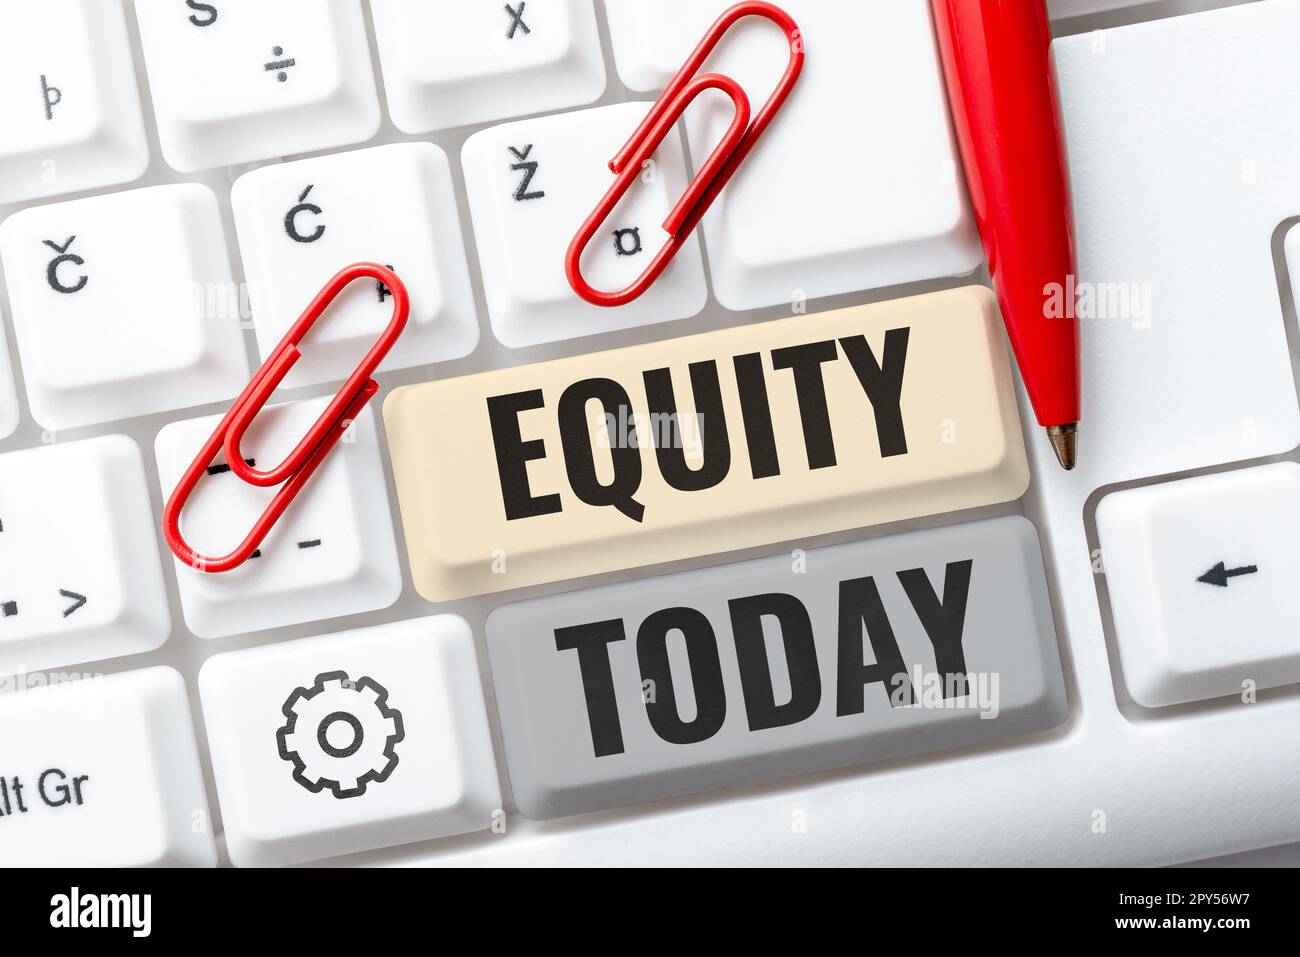 Inspiration showing sign Equity. Word Written on quality of being fair and impartial race free One hand Unity Stock Photo